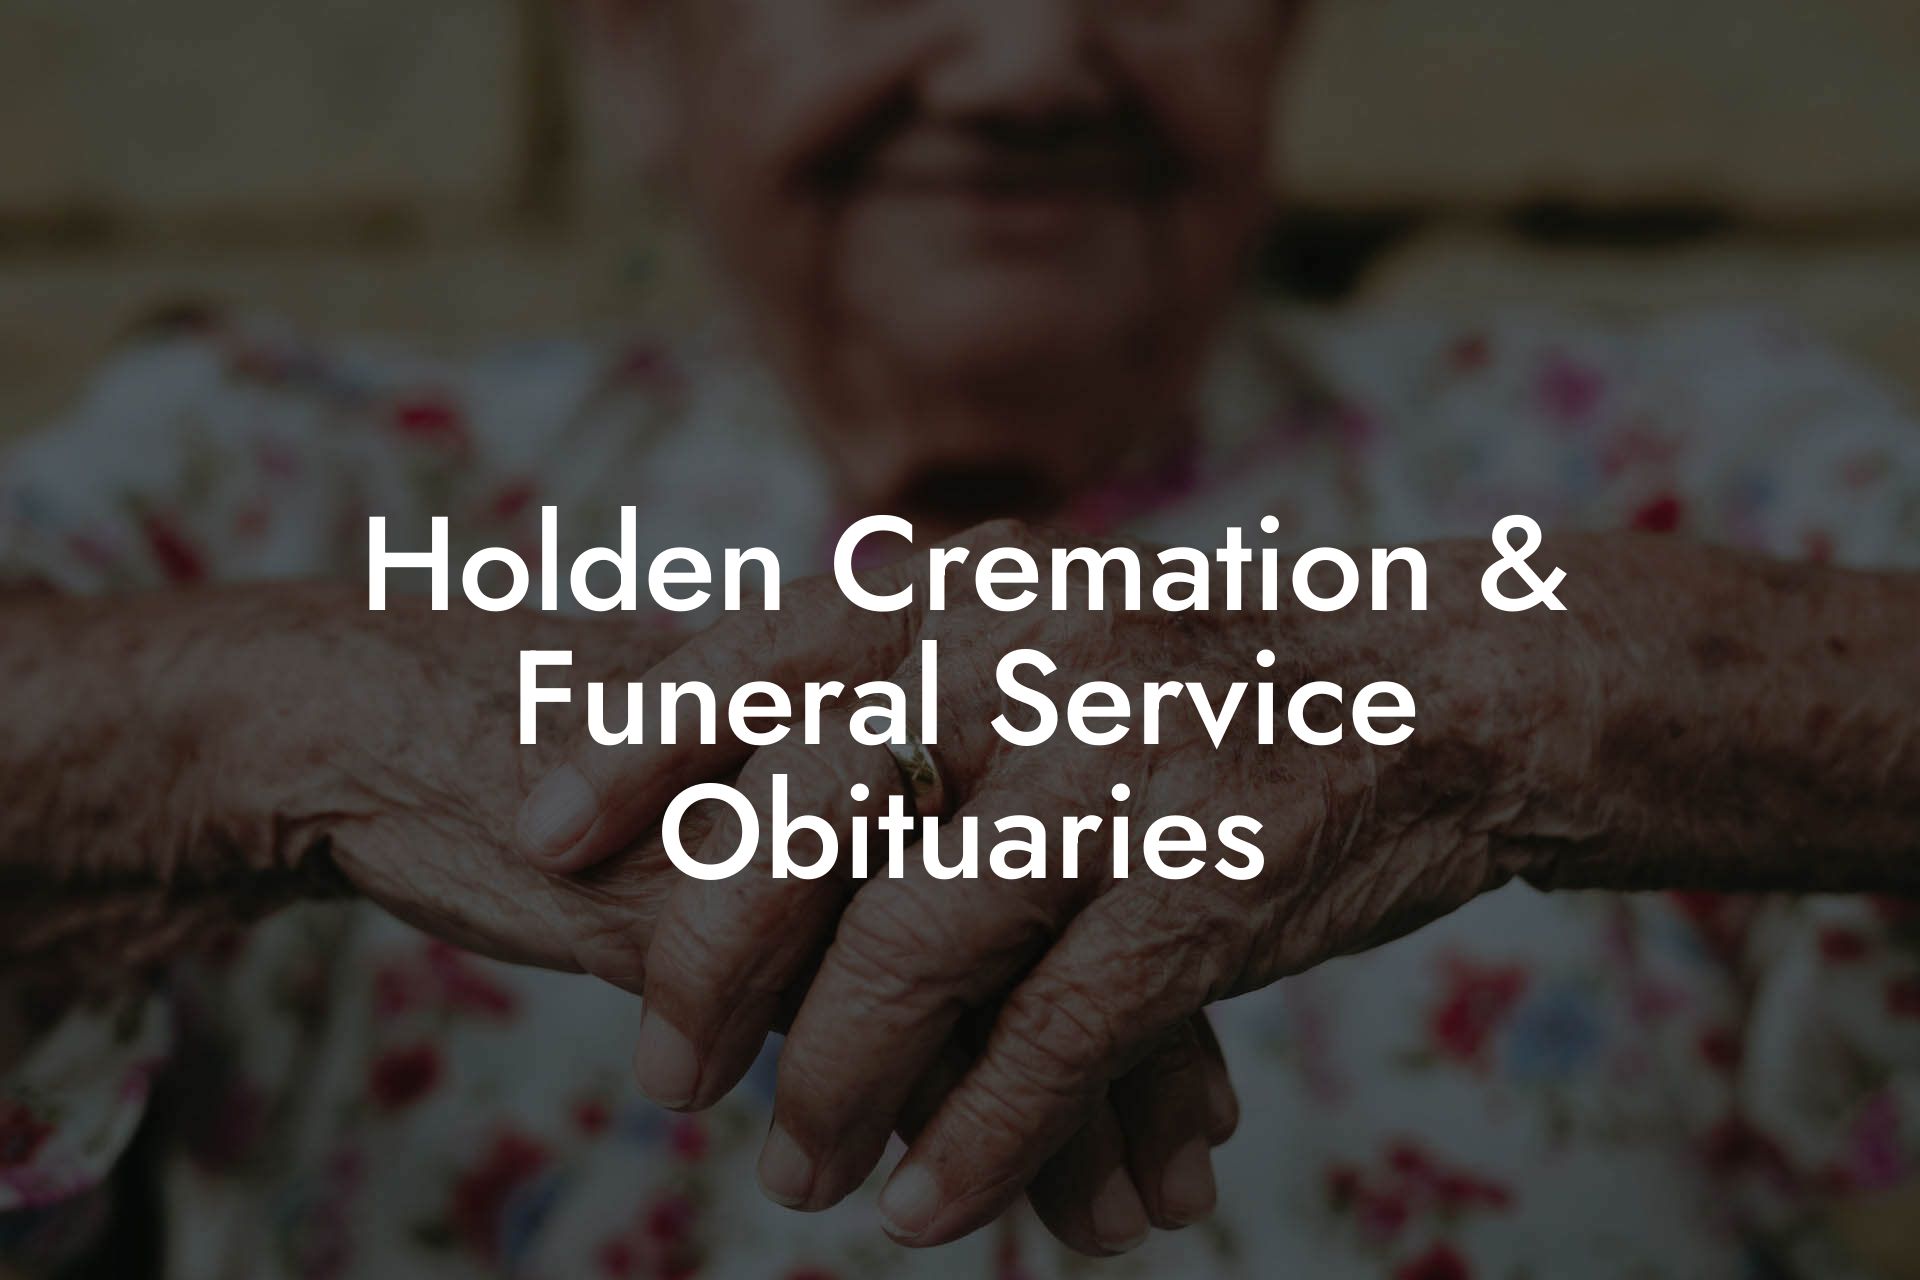 Holden Cremation & Funeral Service Obituaries